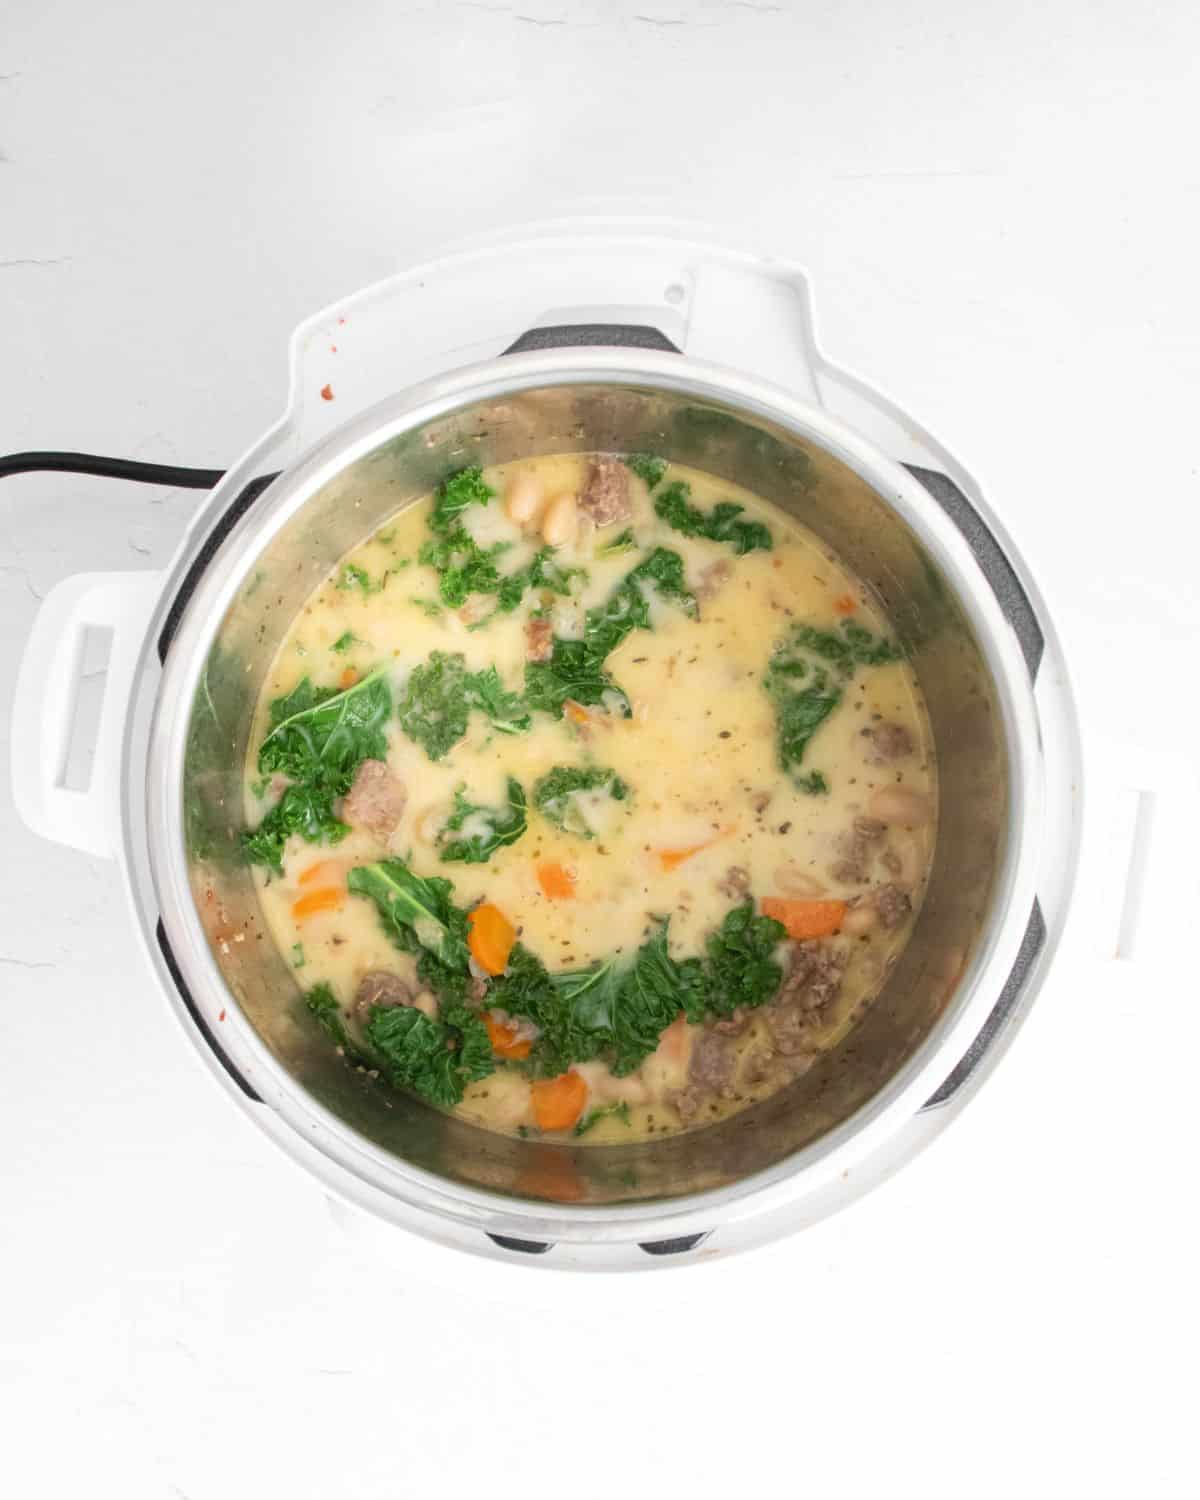 A bean soup with kale and sausage in an instant pot.